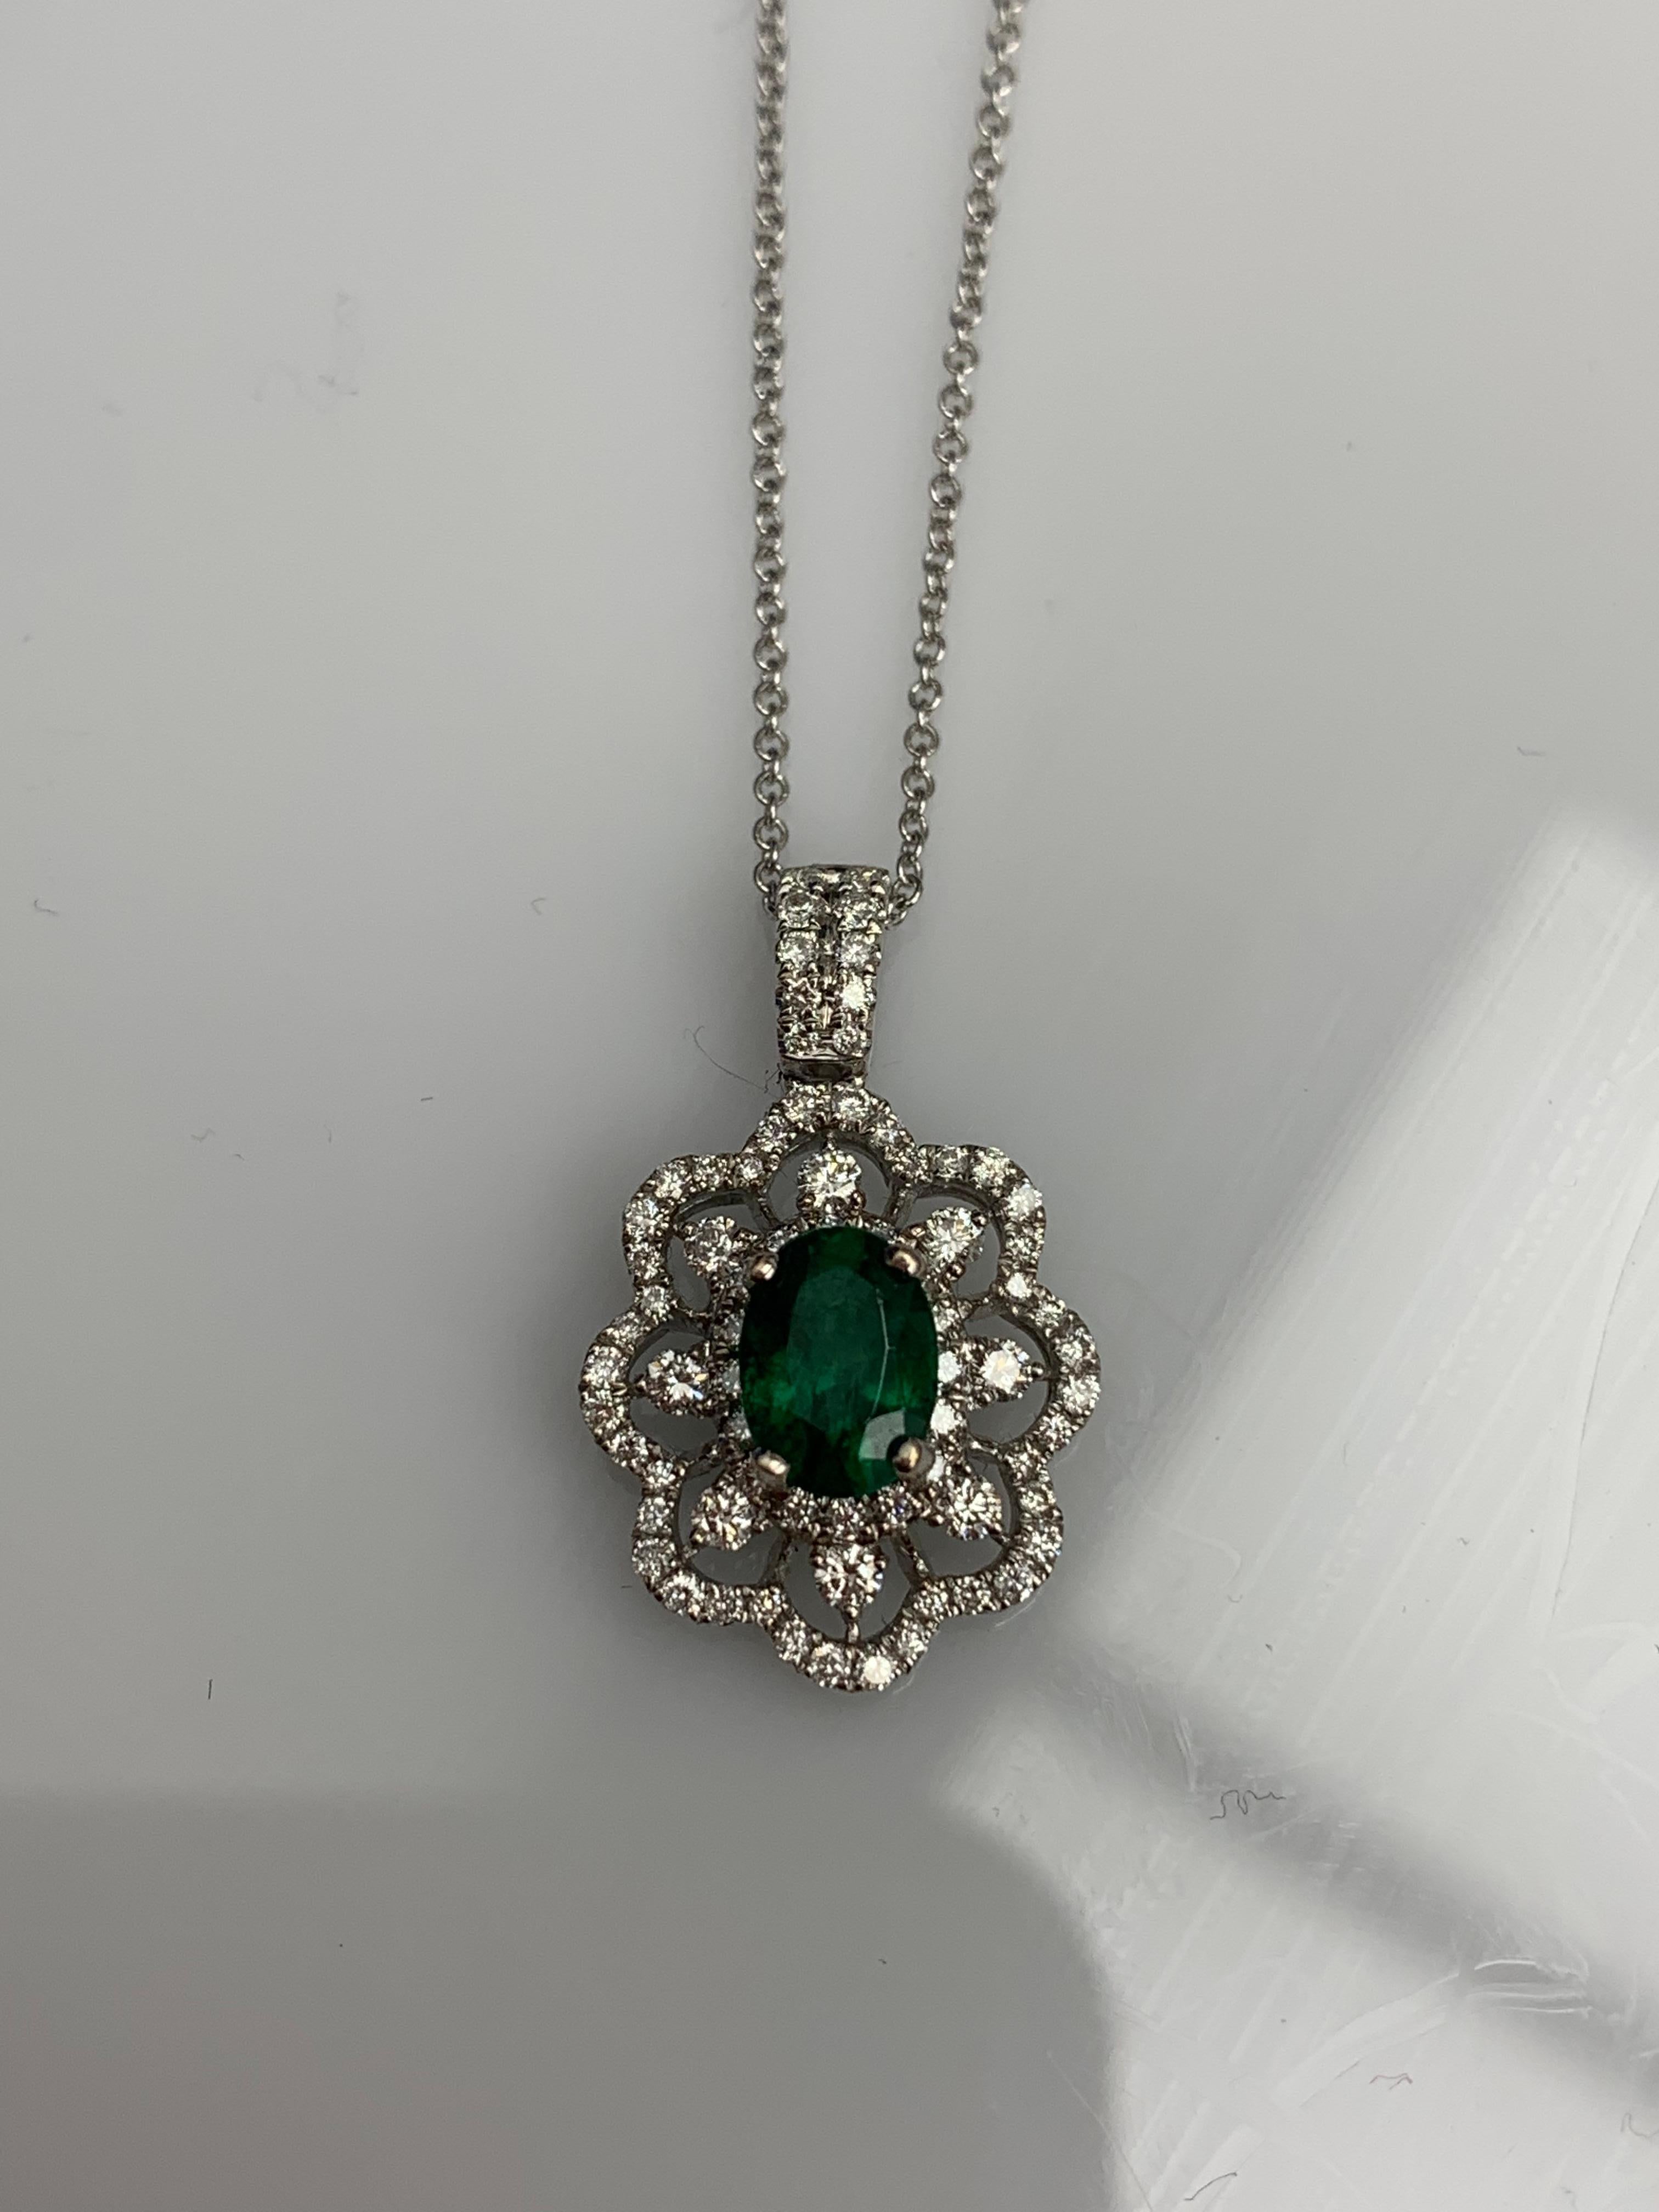 A simple floral motif pendant necklace showcasing a vibrant 0.76-carat oval cut Emerald, surrounded by 0.56 carats of 73 accent round diamonds in an open work design. Made in 18 karats white gold.

Style is available in different price ranges.